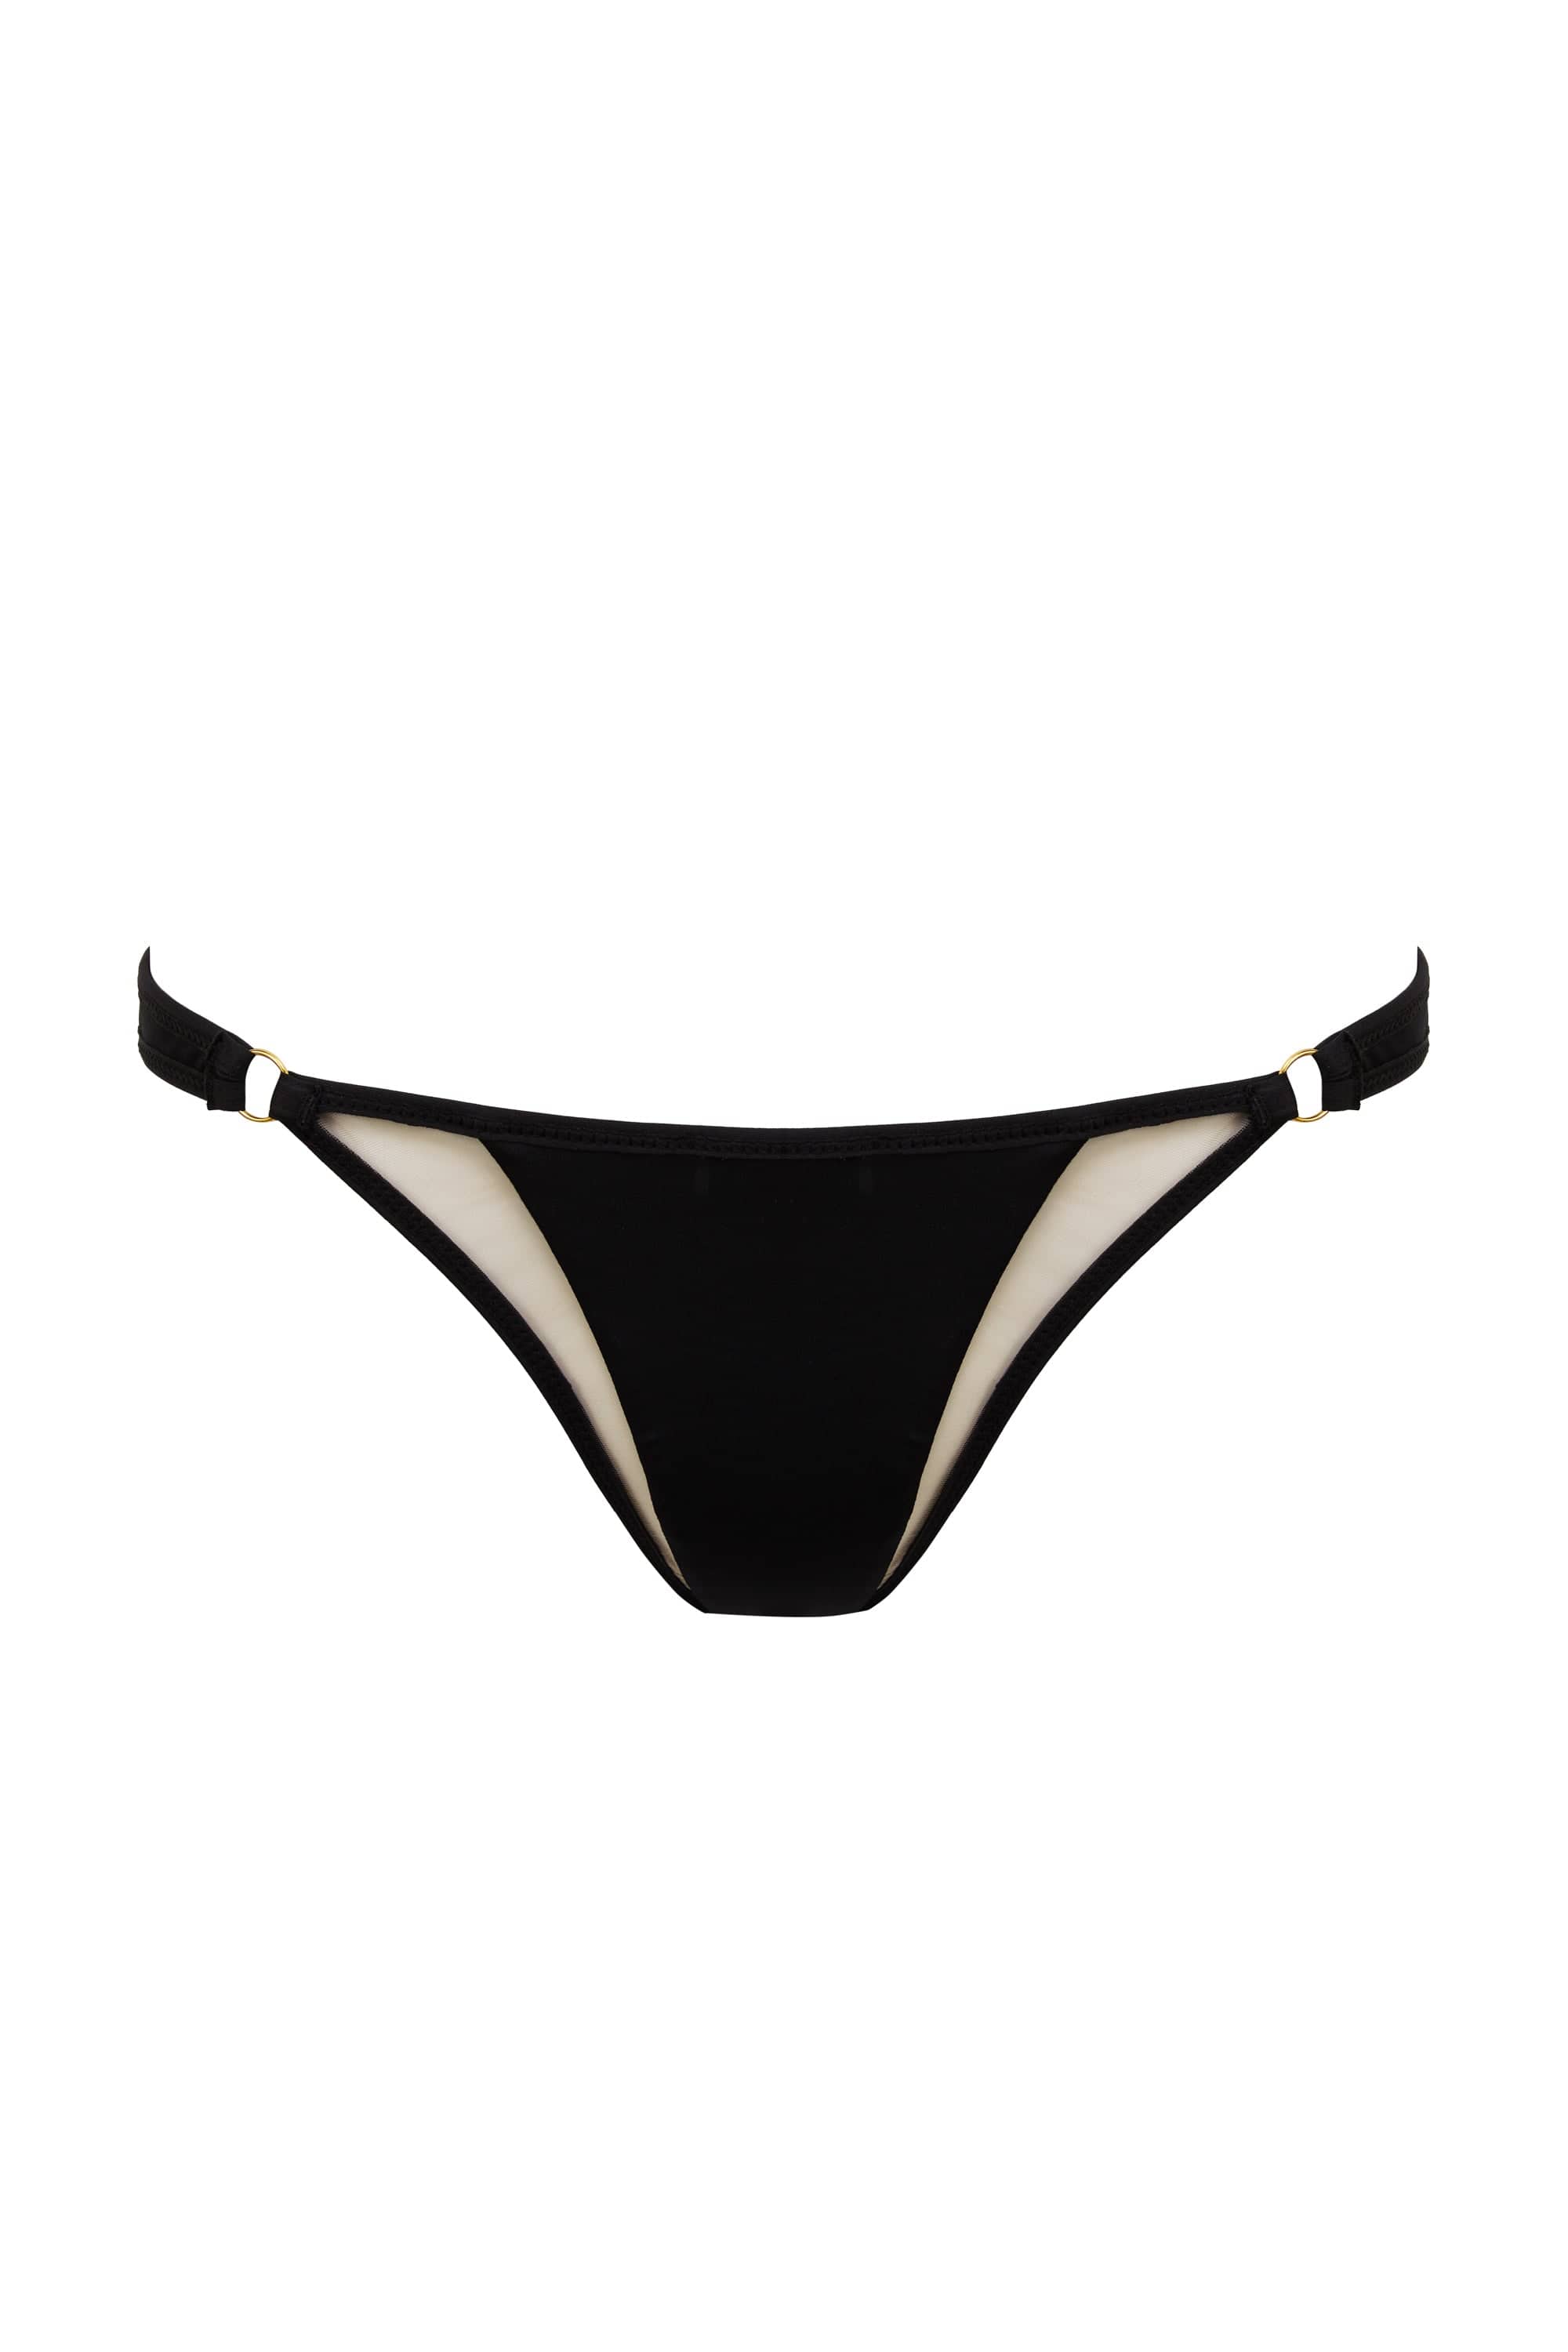 Black mid-rise bikini bottoms with nude mesh panels and gold metal rings